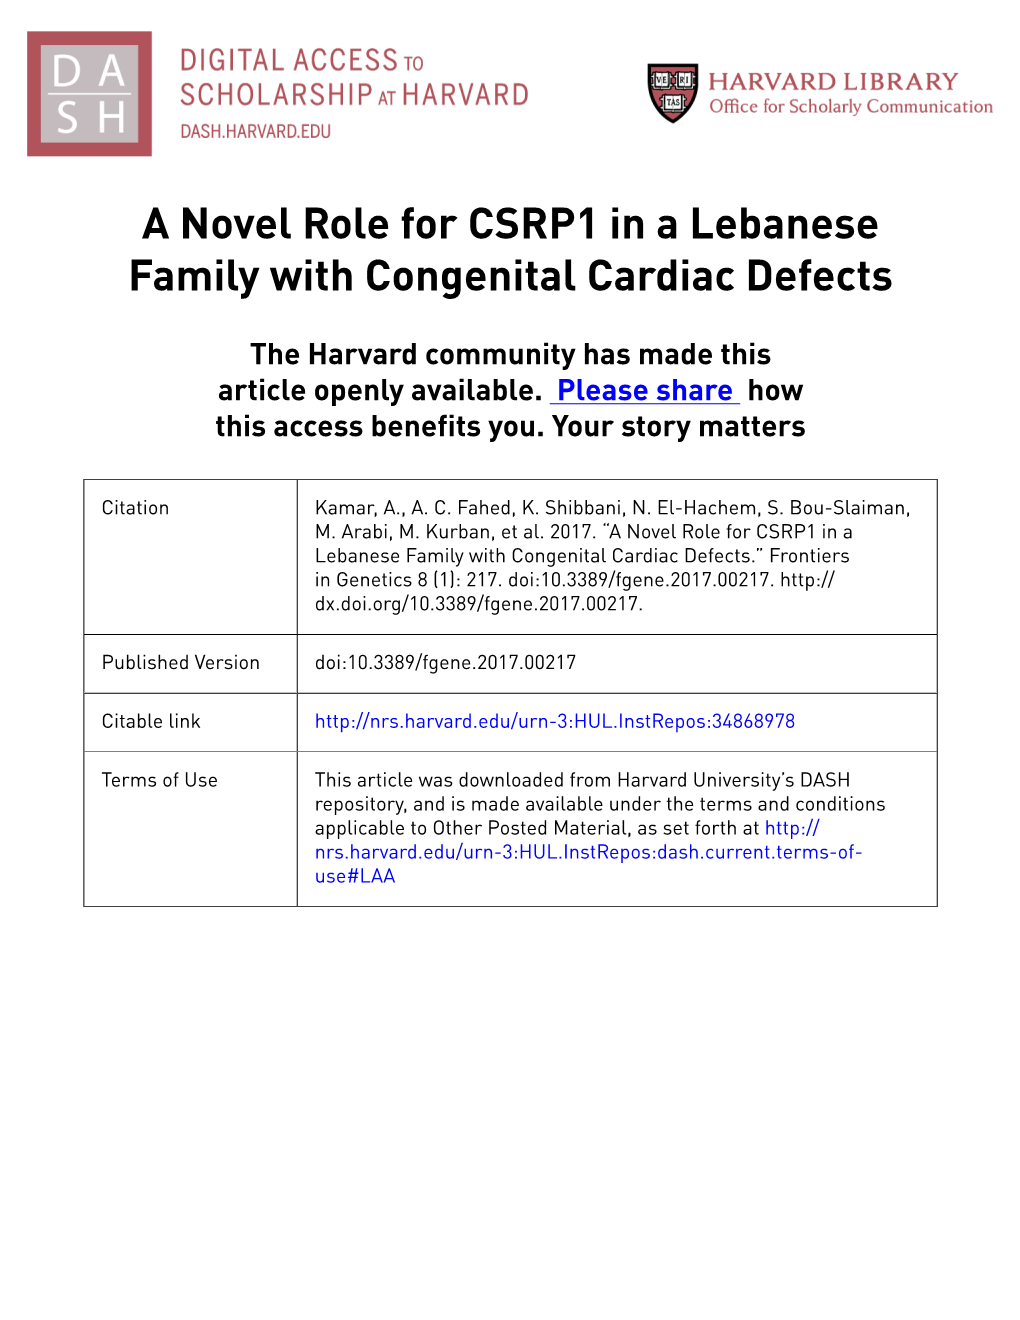 A Novel Role for CSRP1 in a Lebanese Family with Congenital Cardiac Defects